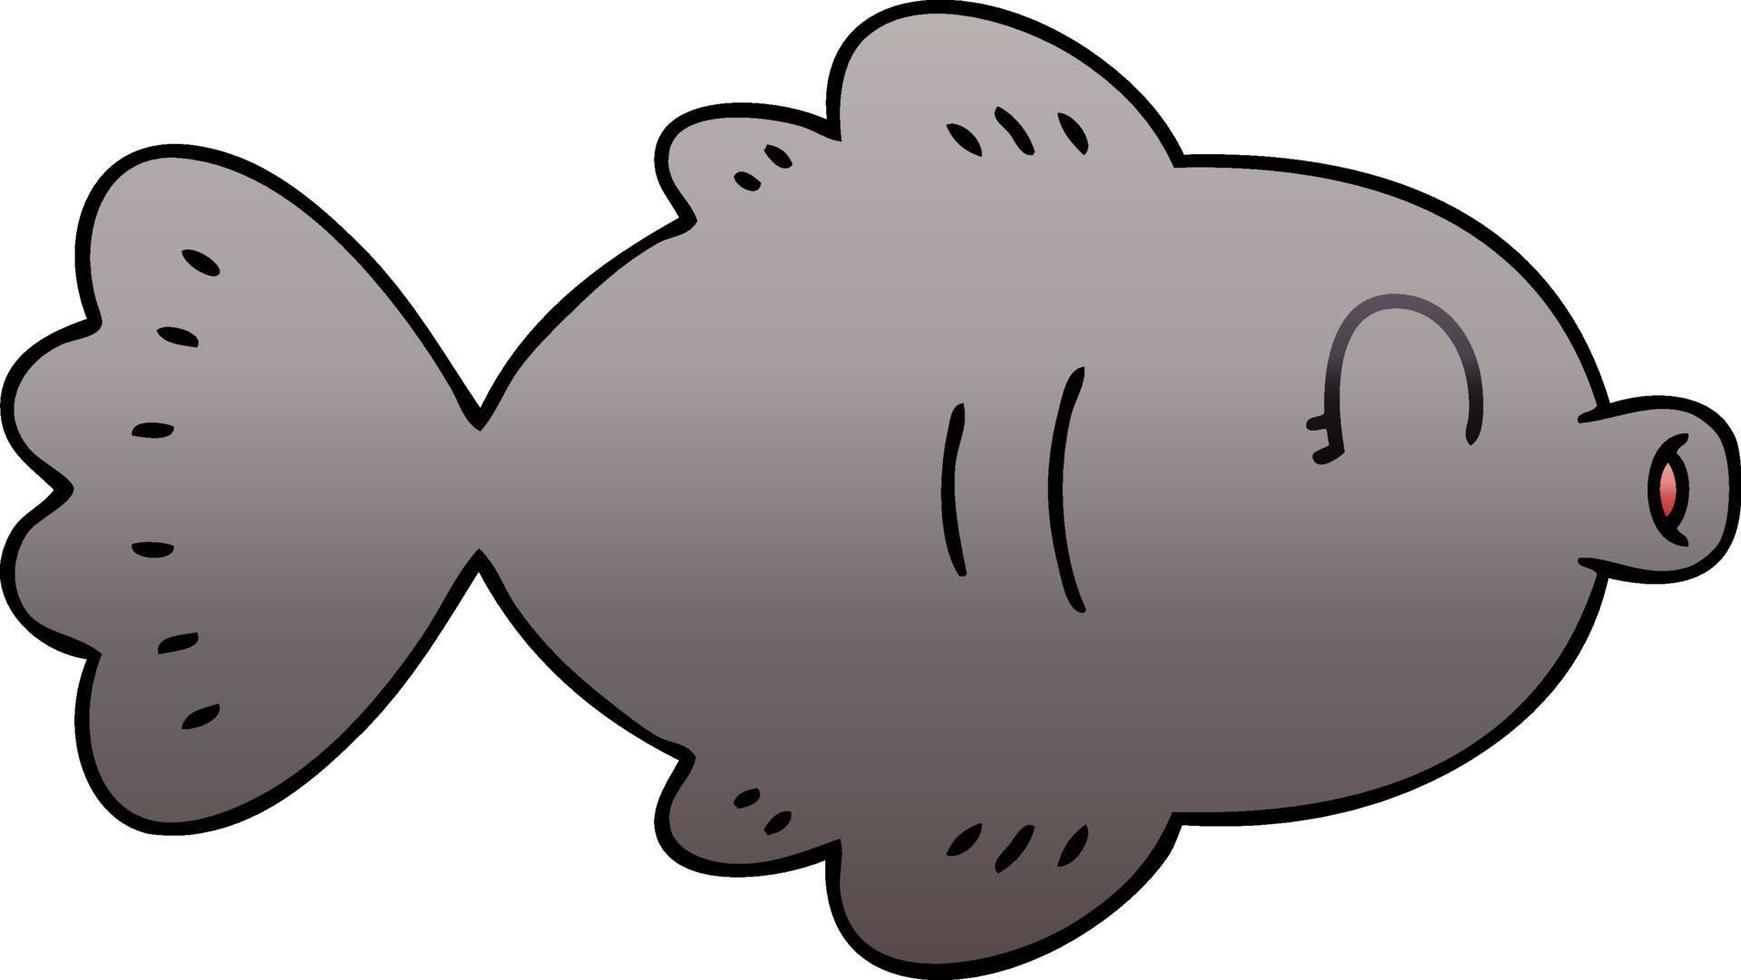 quirky gradient shaded cartoon fish vector